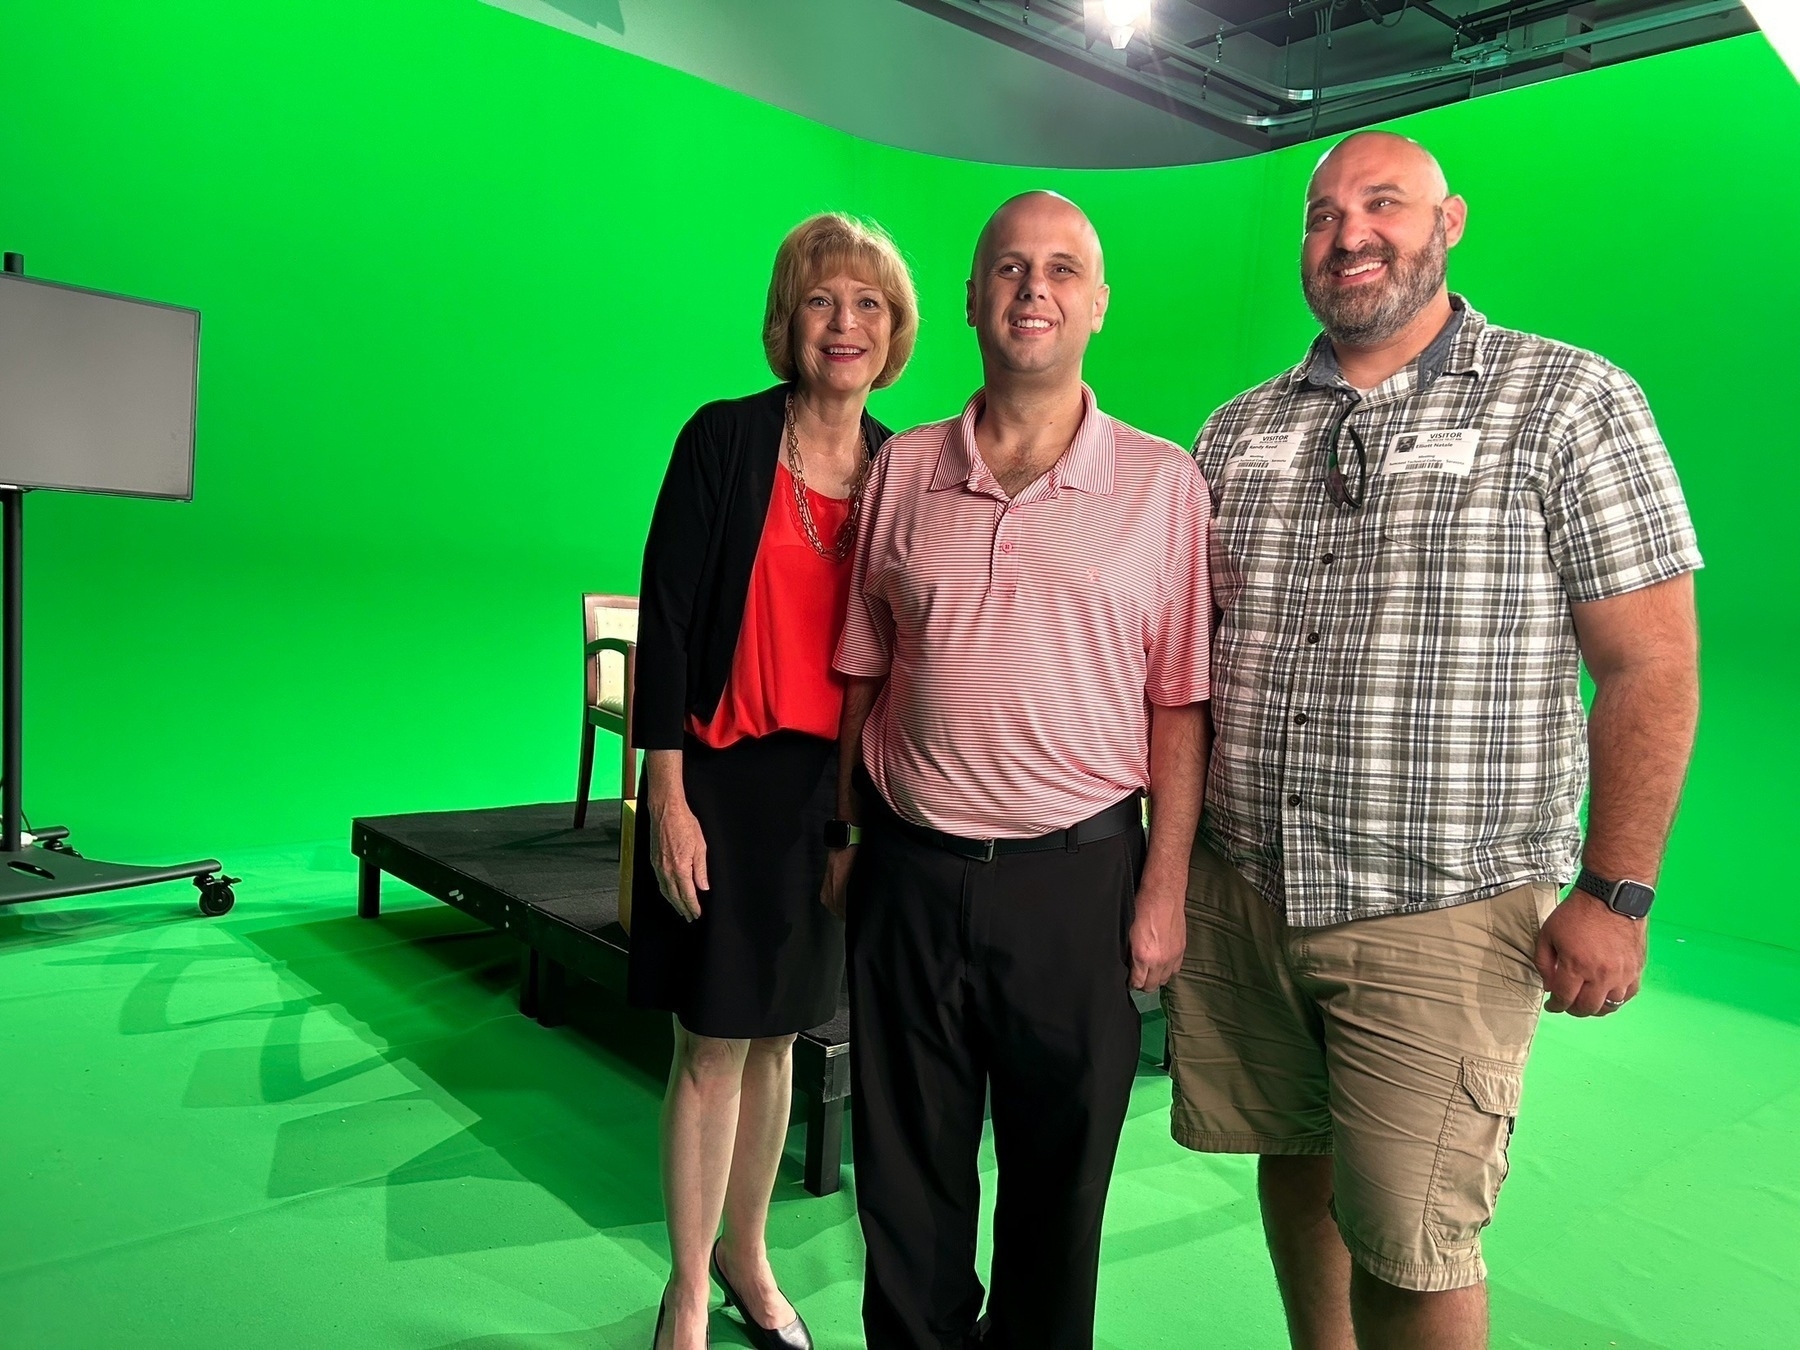 Auto-generated description: Three people are standing in front of a green screen on a set with stage equipment visible.